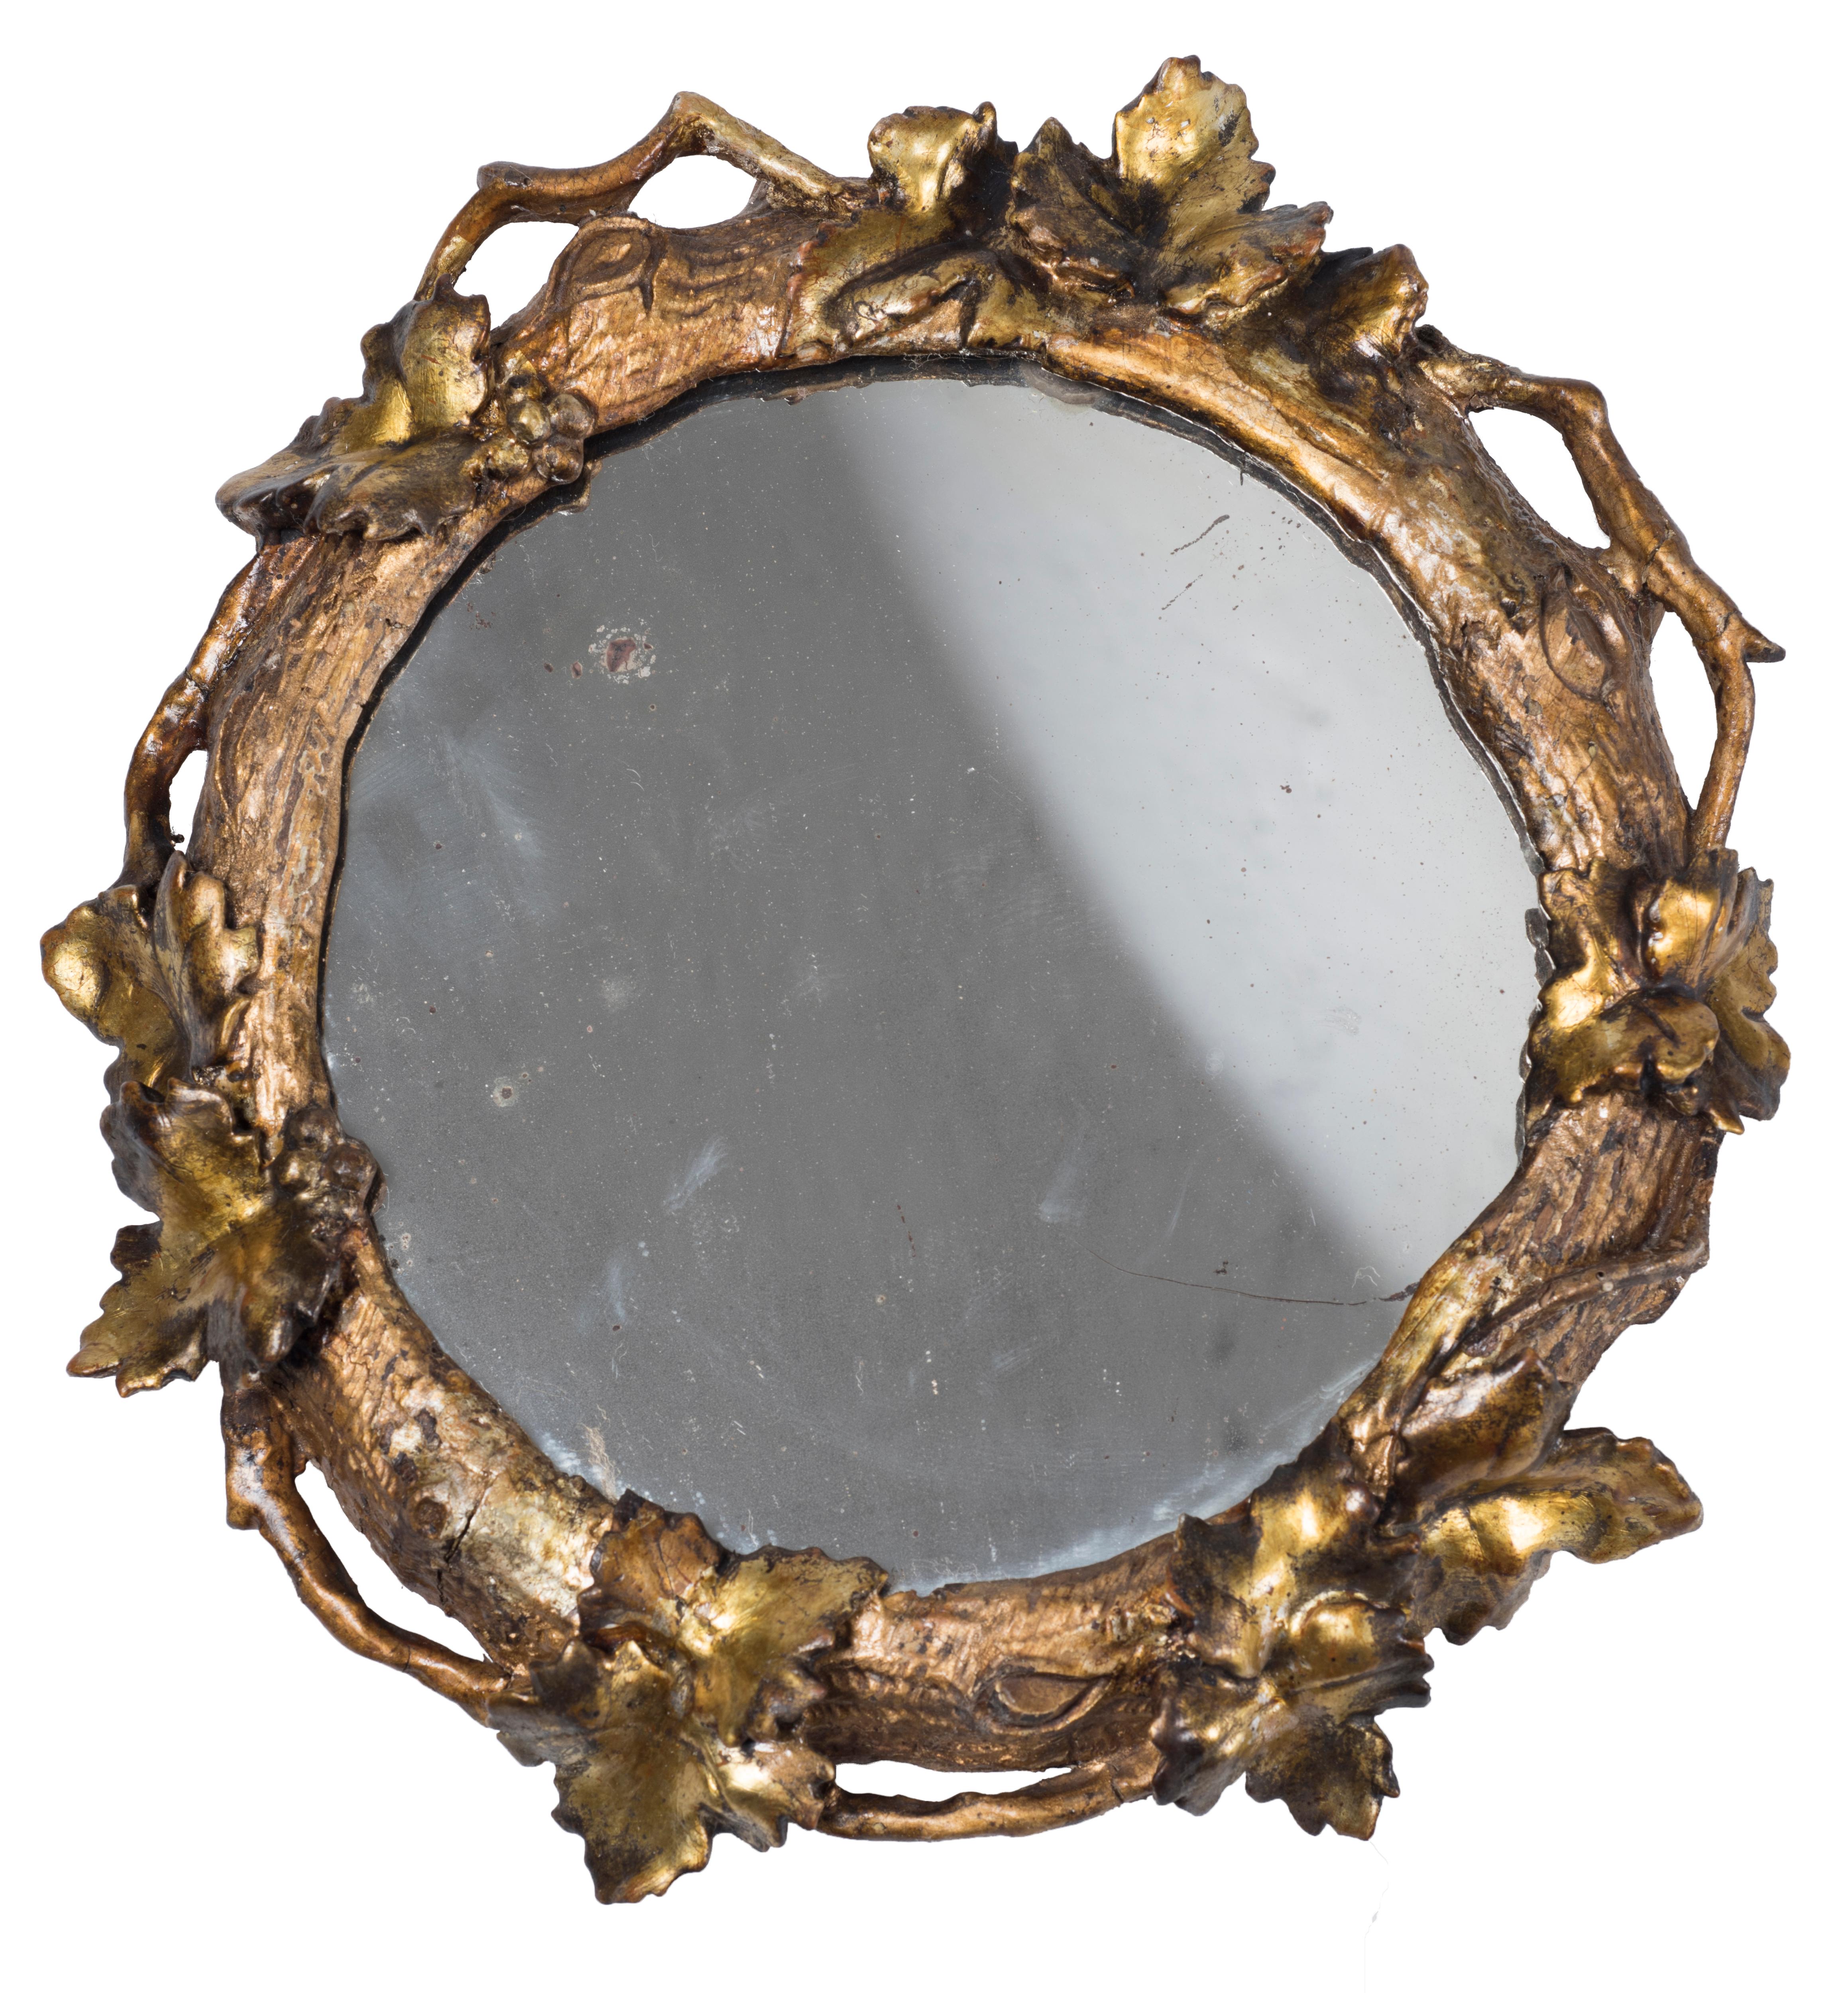 Four small circular wall mirrors, end of 18th century.
Gilded wood finely decorated with grapevine shoots.
Good conditions.

This artwork is shipped from Italy. Under existing legislation, any artwork in Italy created over 70 years ago by an